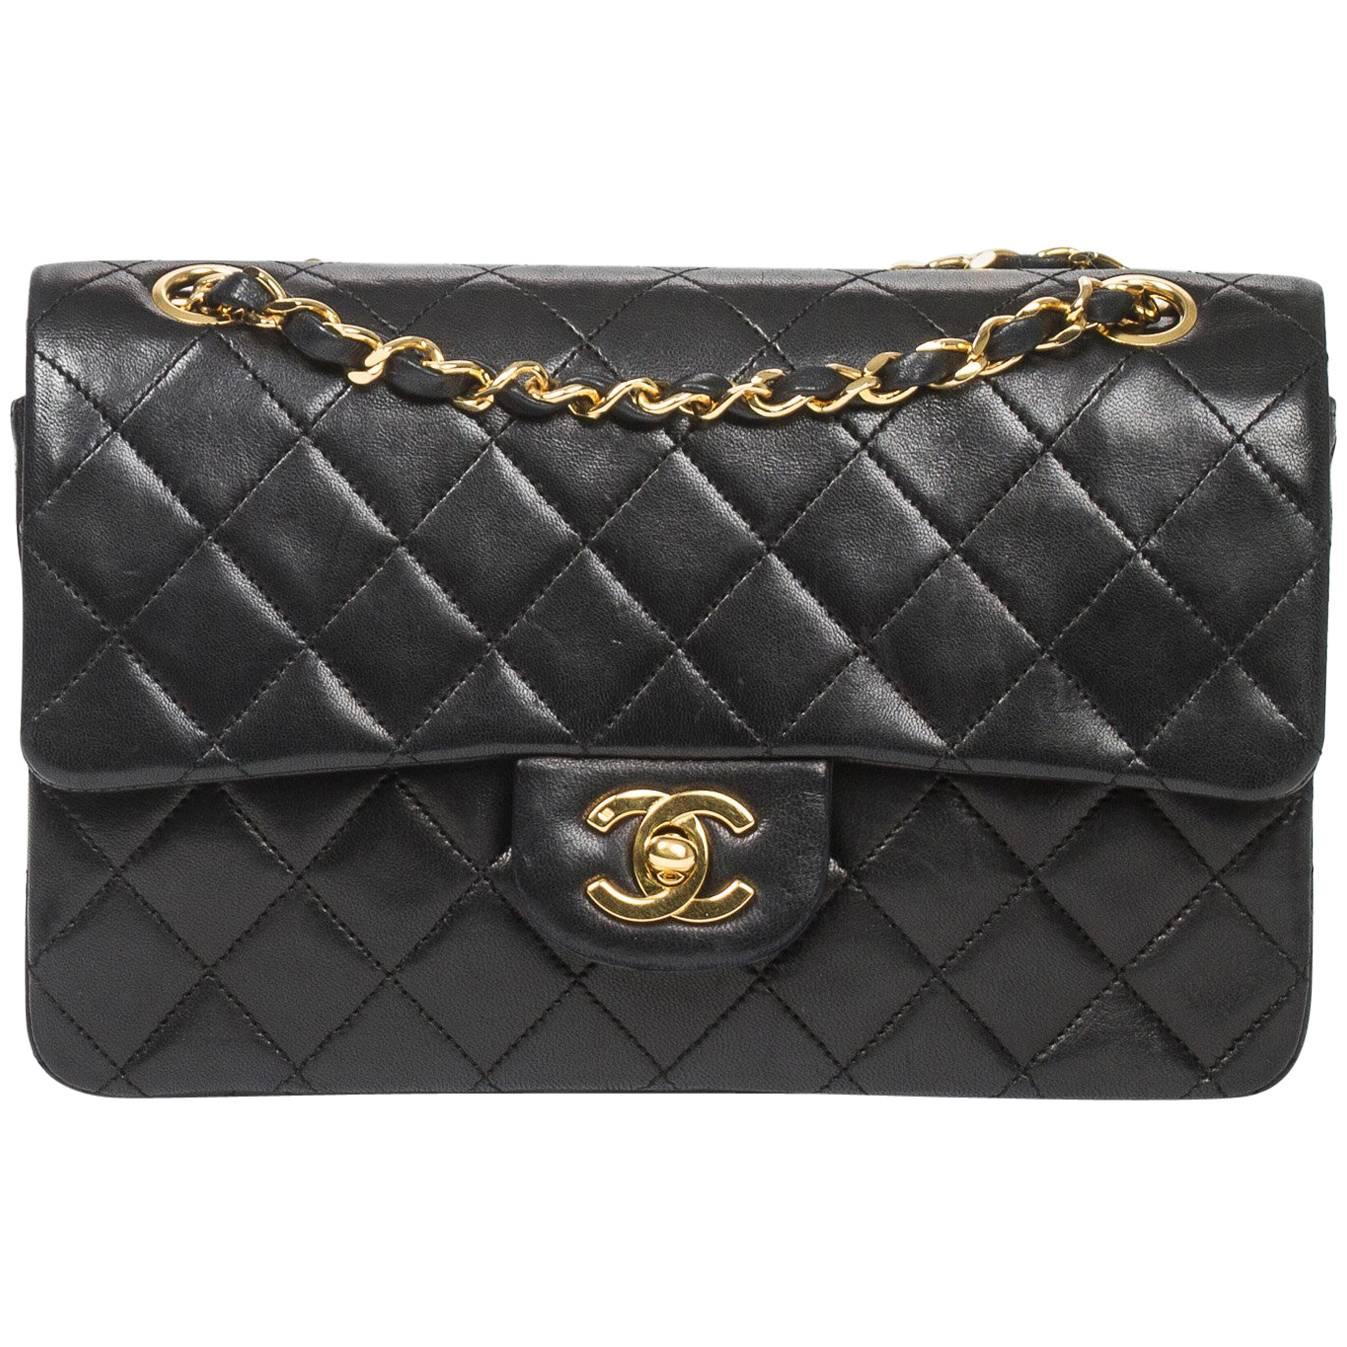 Chanel Classic Double Flap Black Leather Bag For Sale